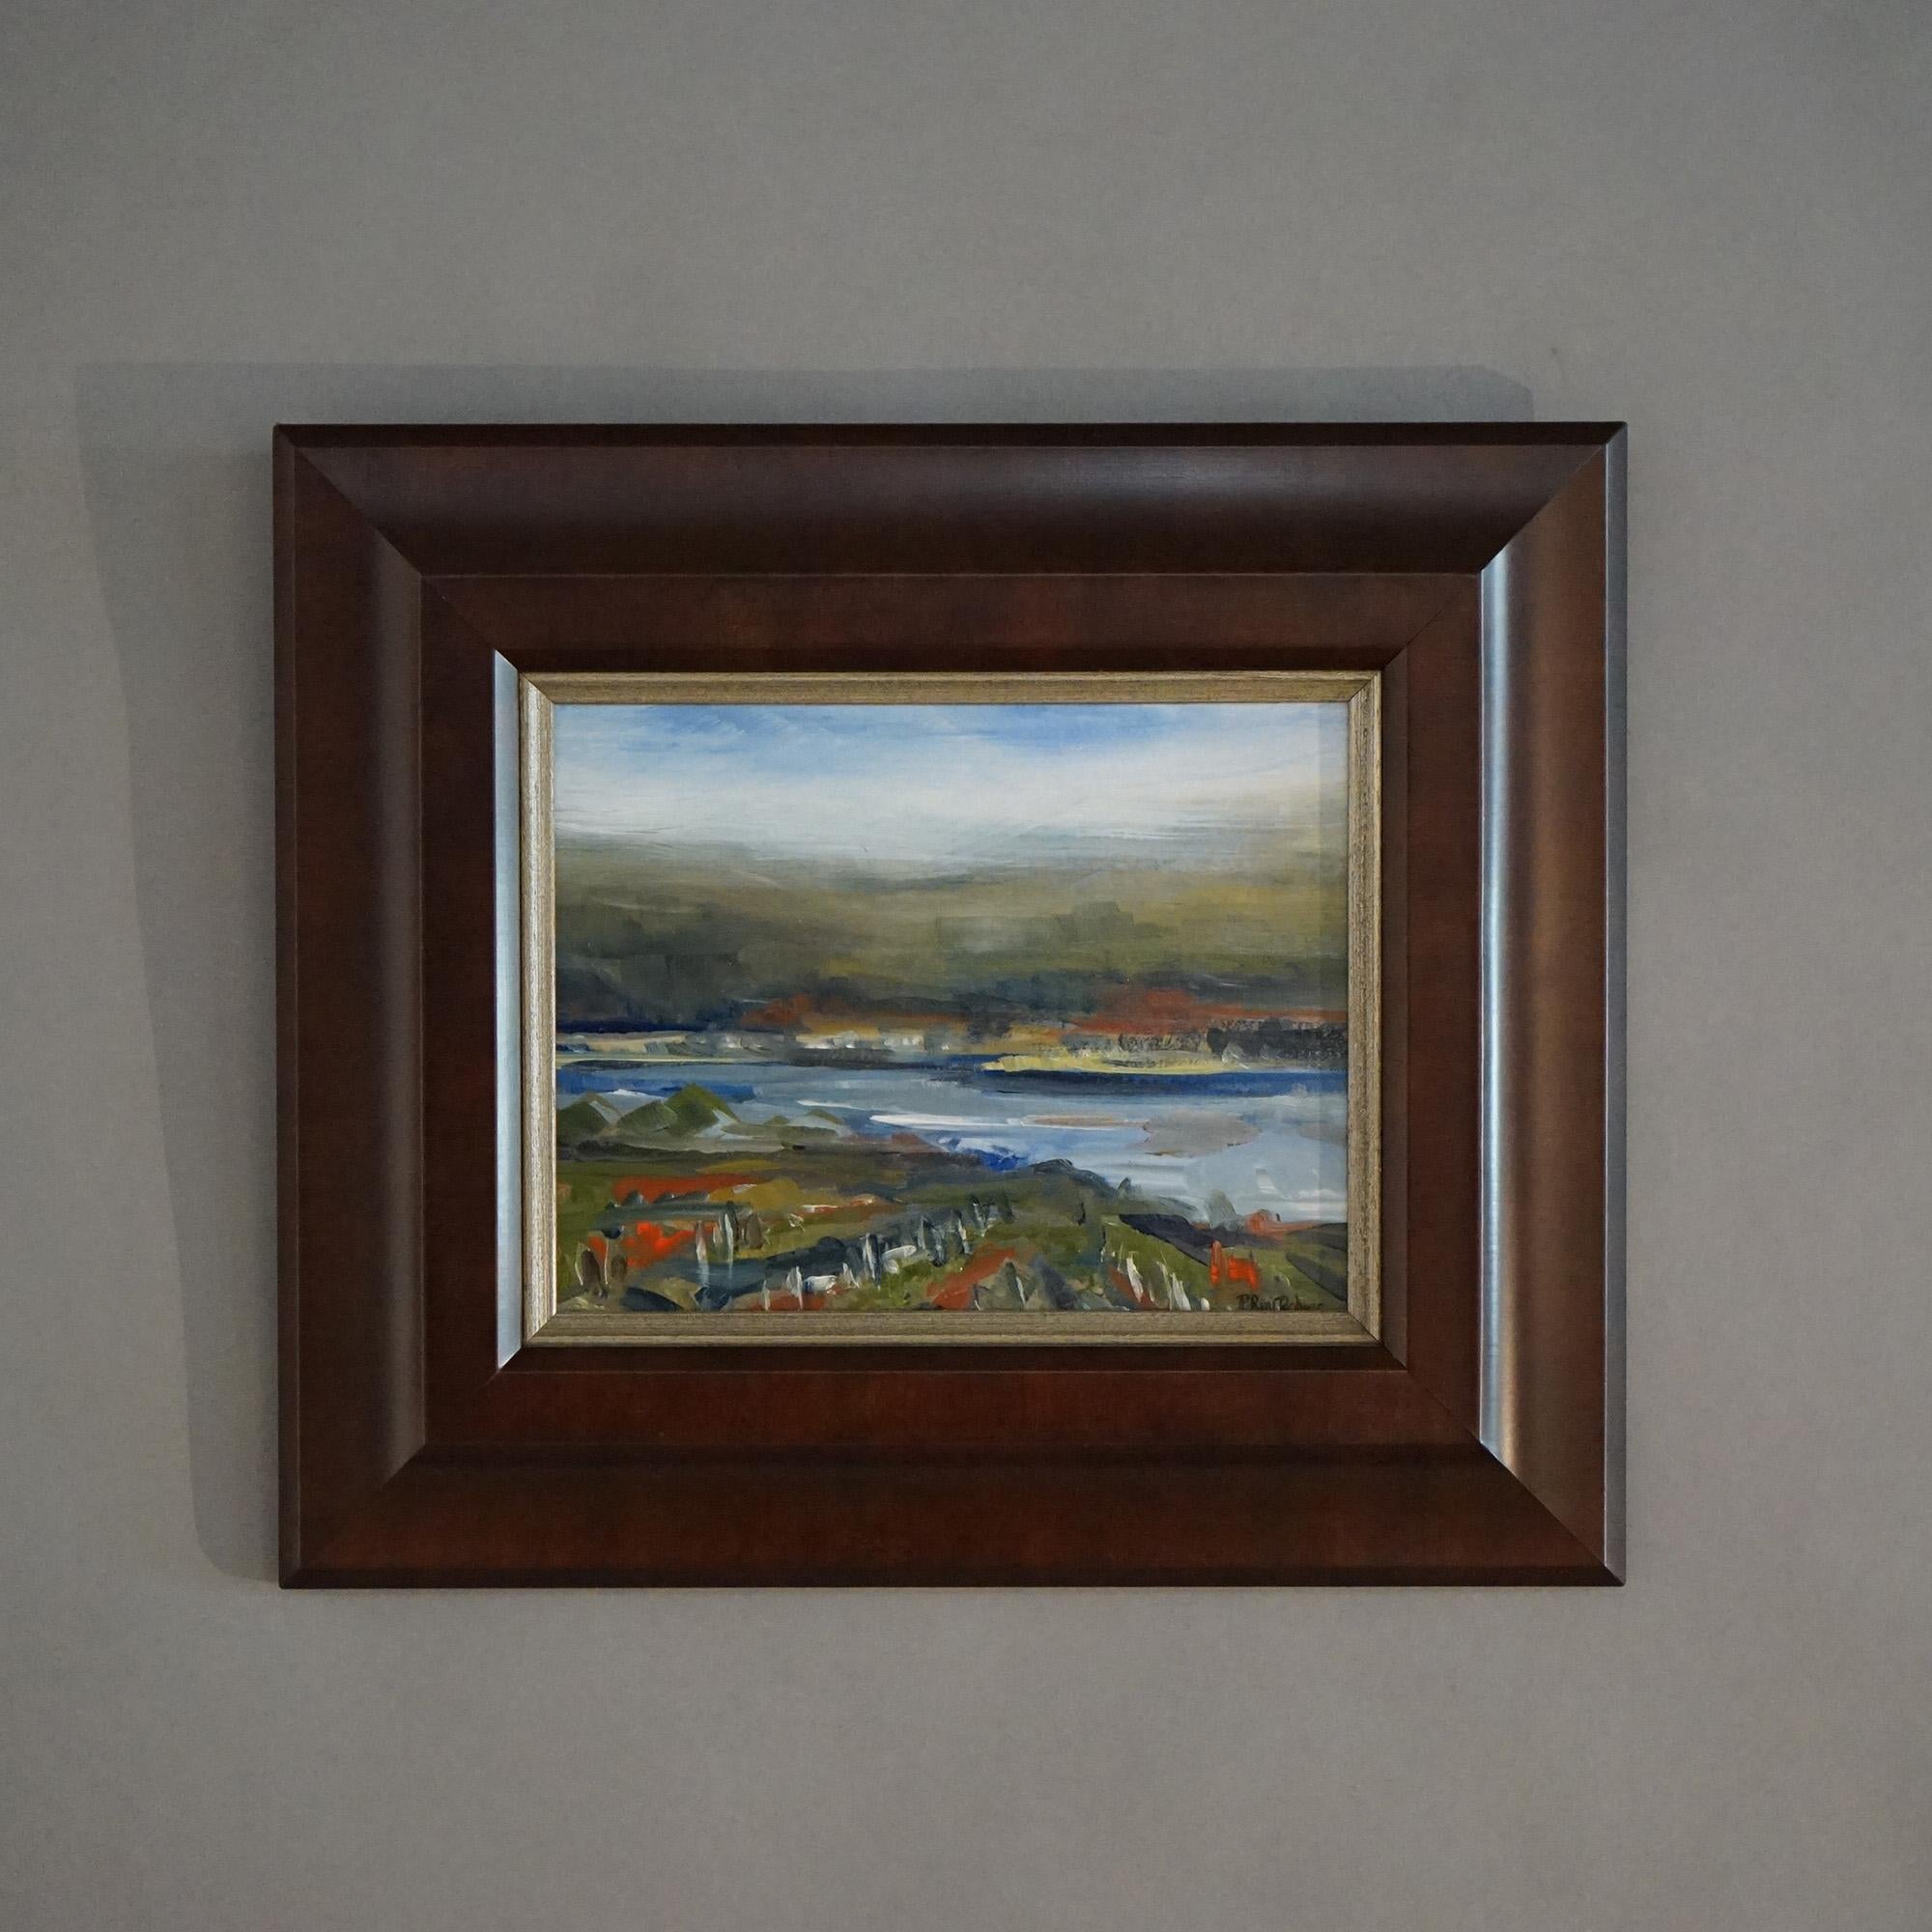 Impressionistic Landscape Painting of Finger Lakes, NY with Vineyard by Pat Rini Rohrer 20thC

Measures - 13